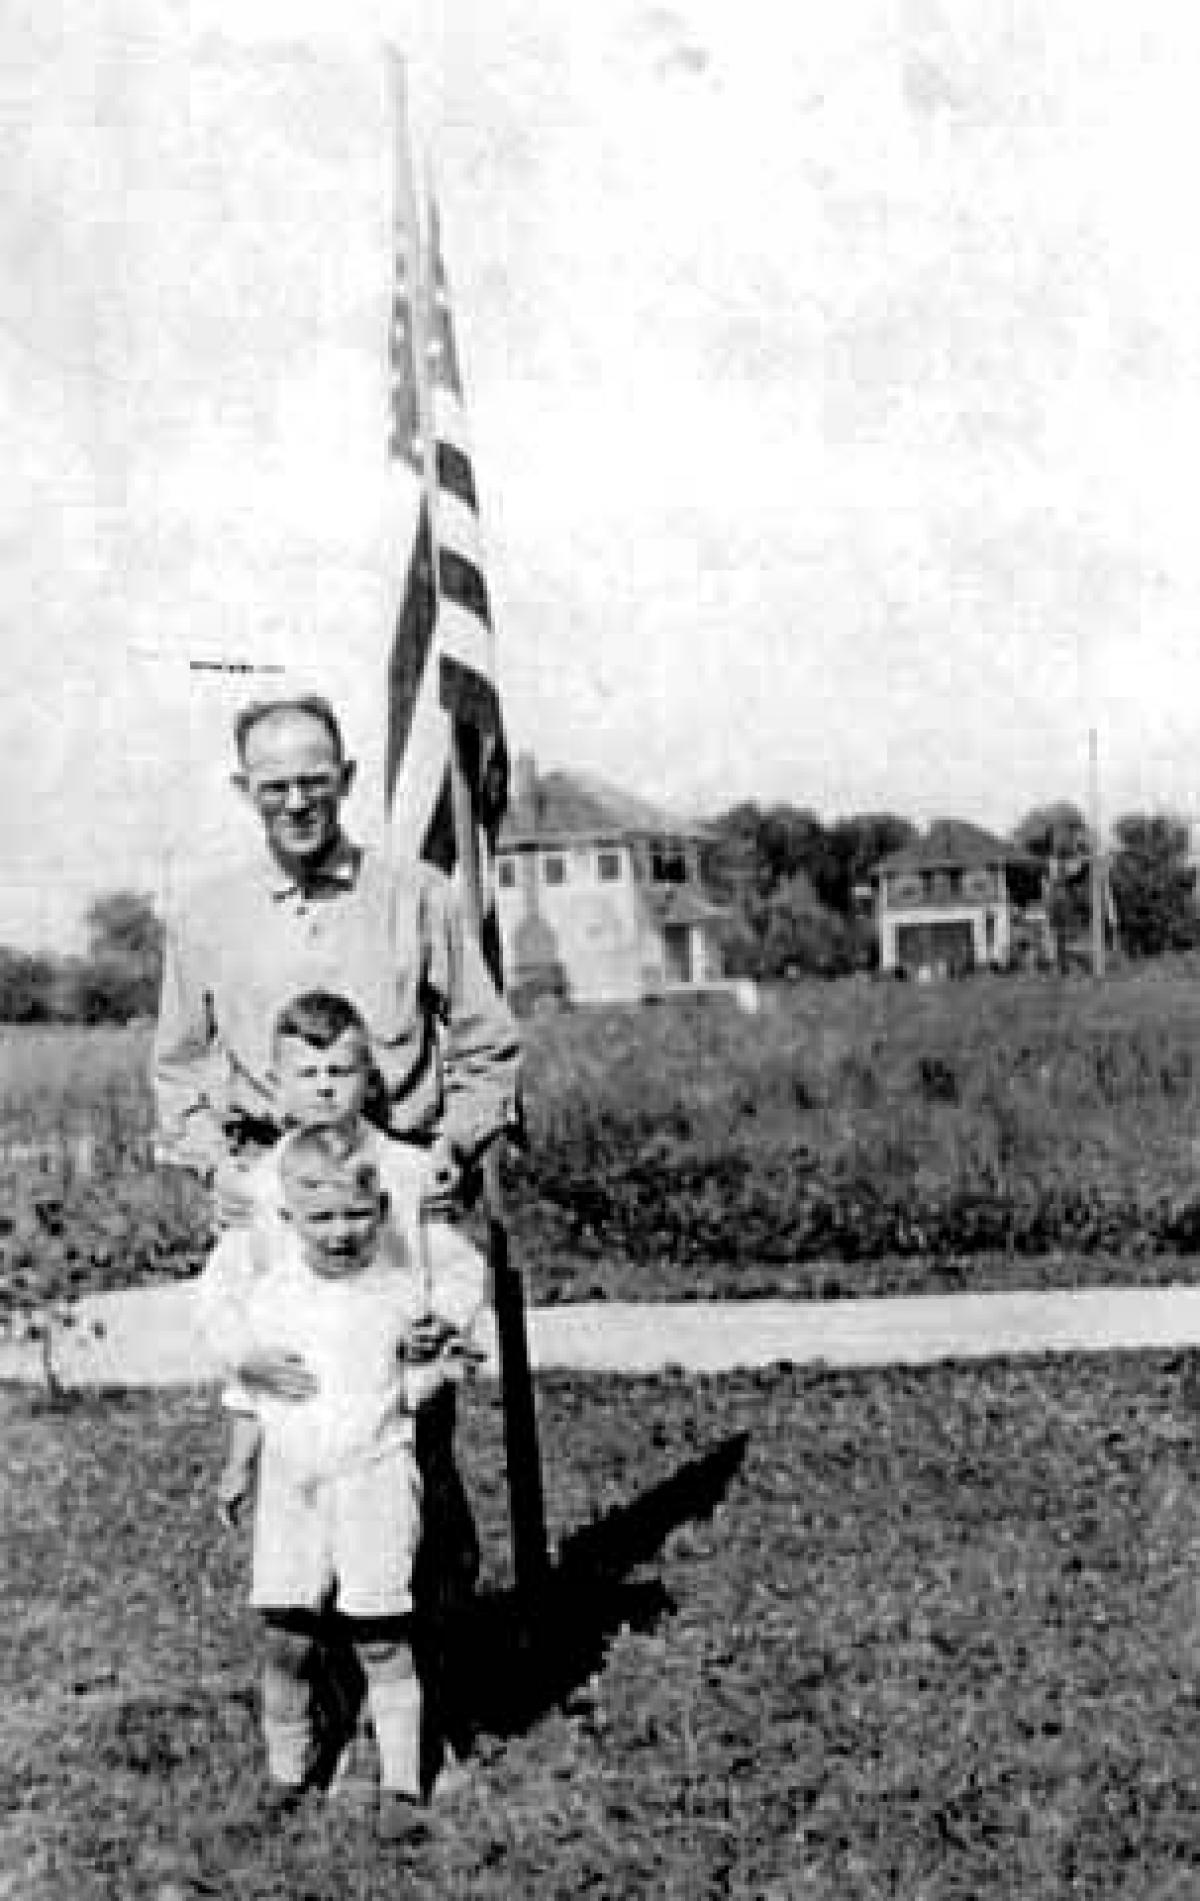 S.J. Bockstanz with sons John and Bruce, c. 1927